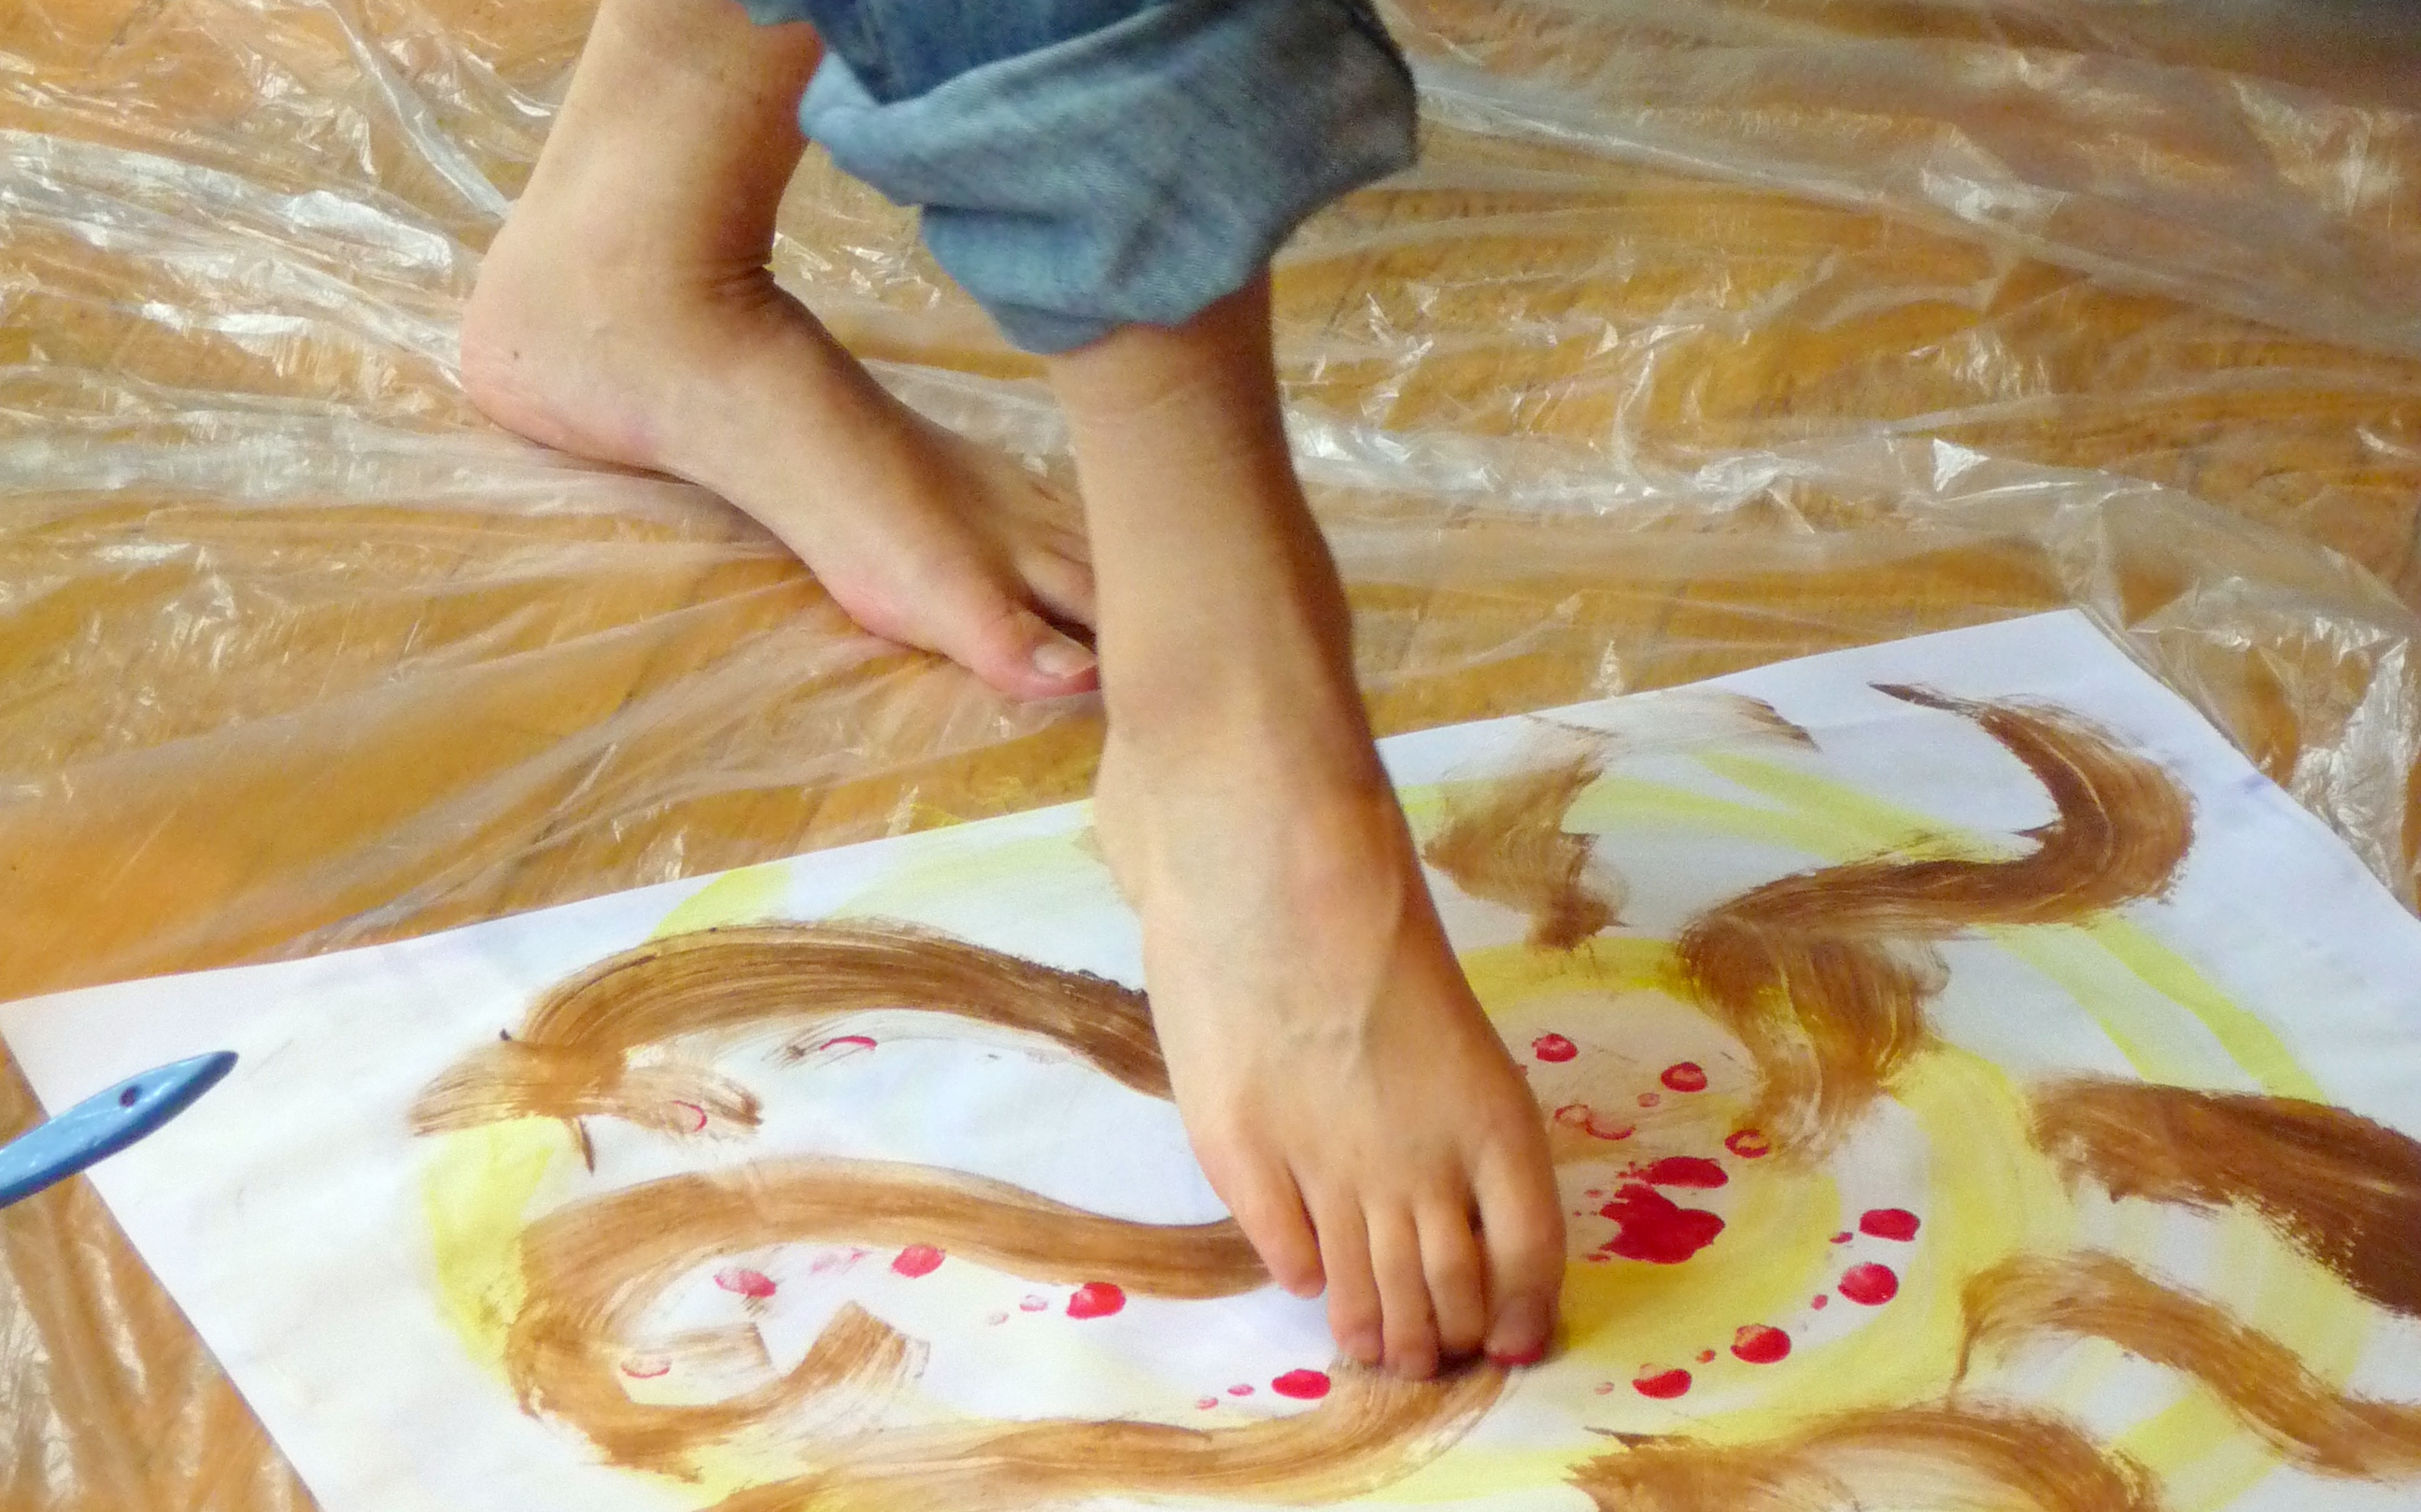 Foot Painting 2592x1619